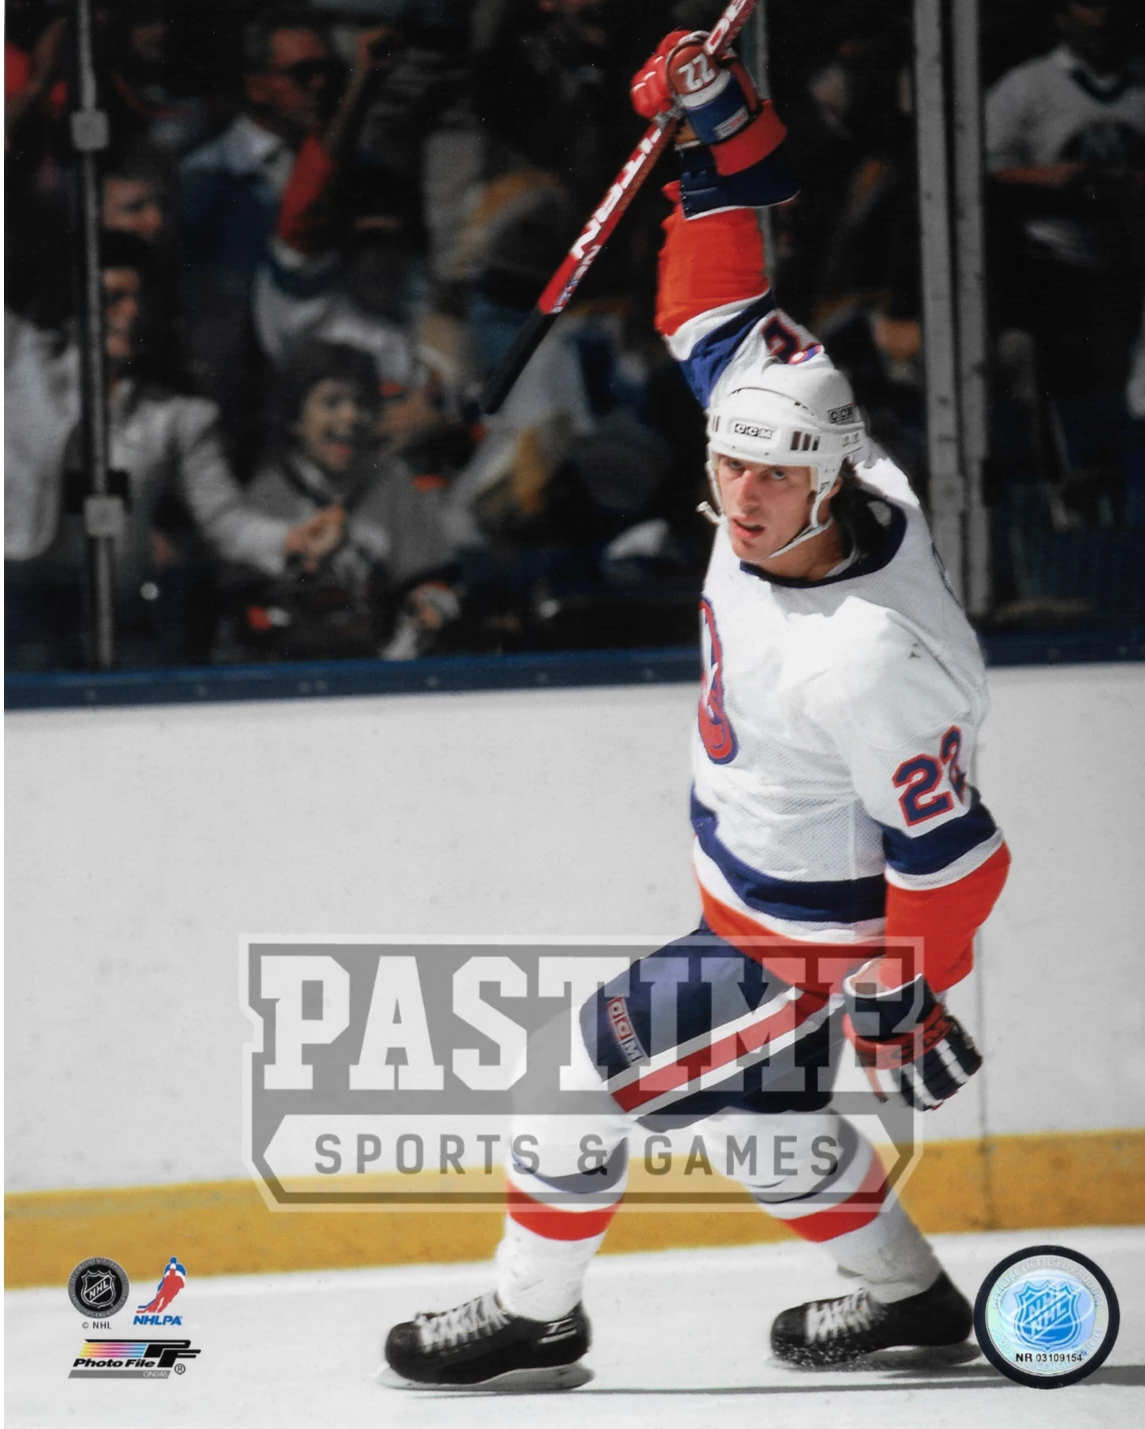 Mike Bossy Autographed 8x10 Photo Matted in an 11x14 Frame